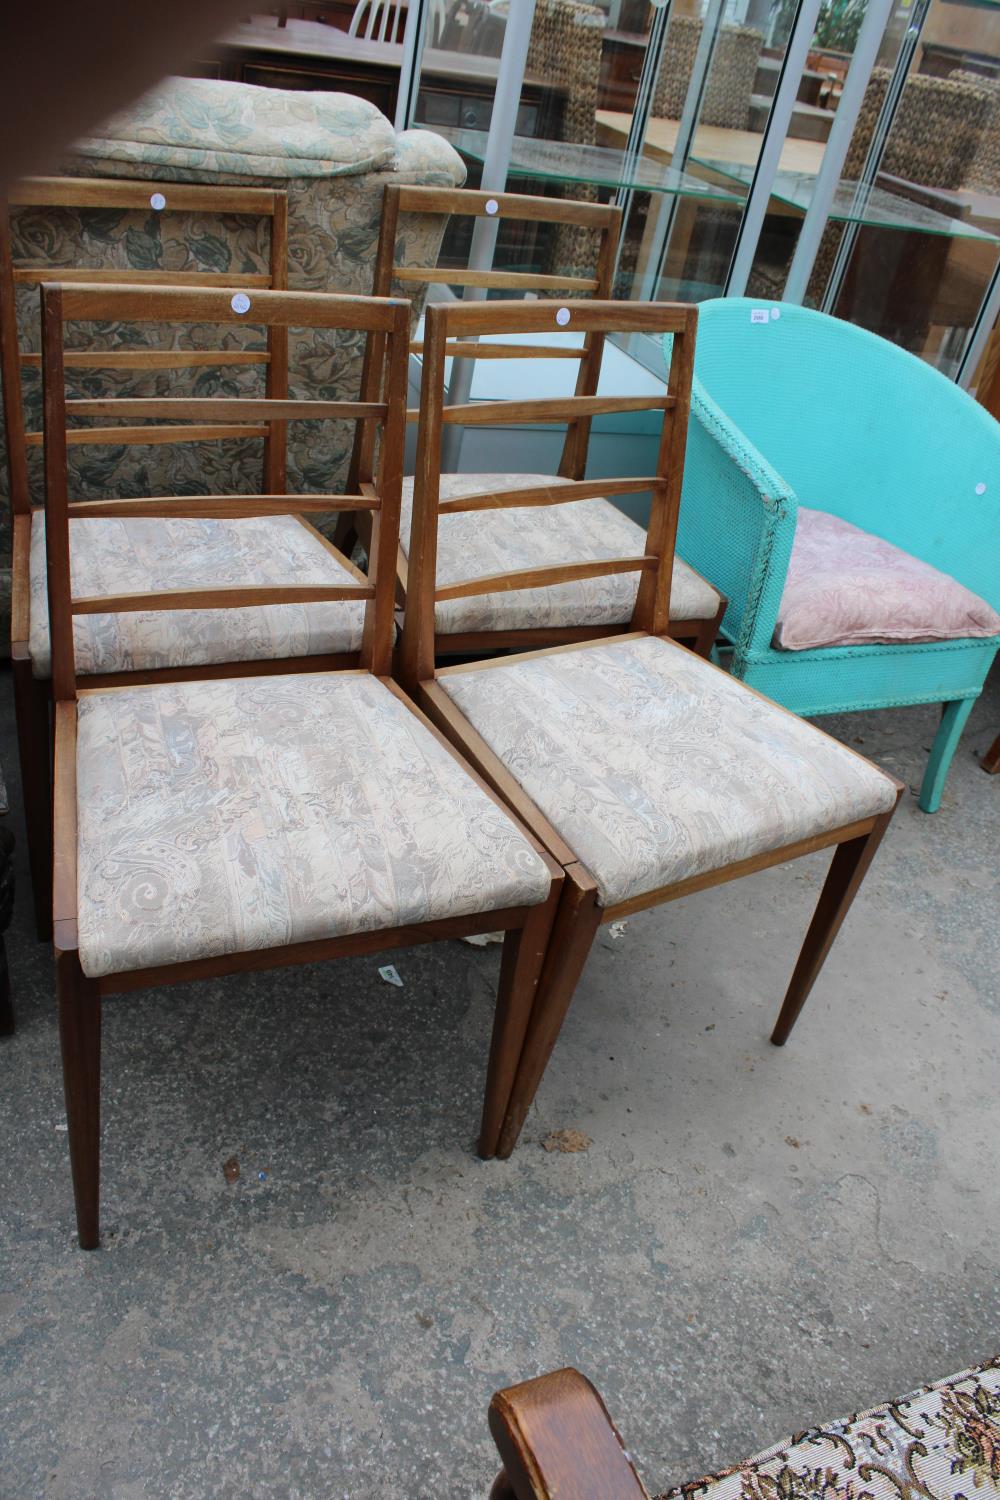 FOUR RETRO TEAK LADDER-BACK DINING CHAIRS AND LLOYD LOOM STYLE BEDROOM CHAIR - Image 2 of 2